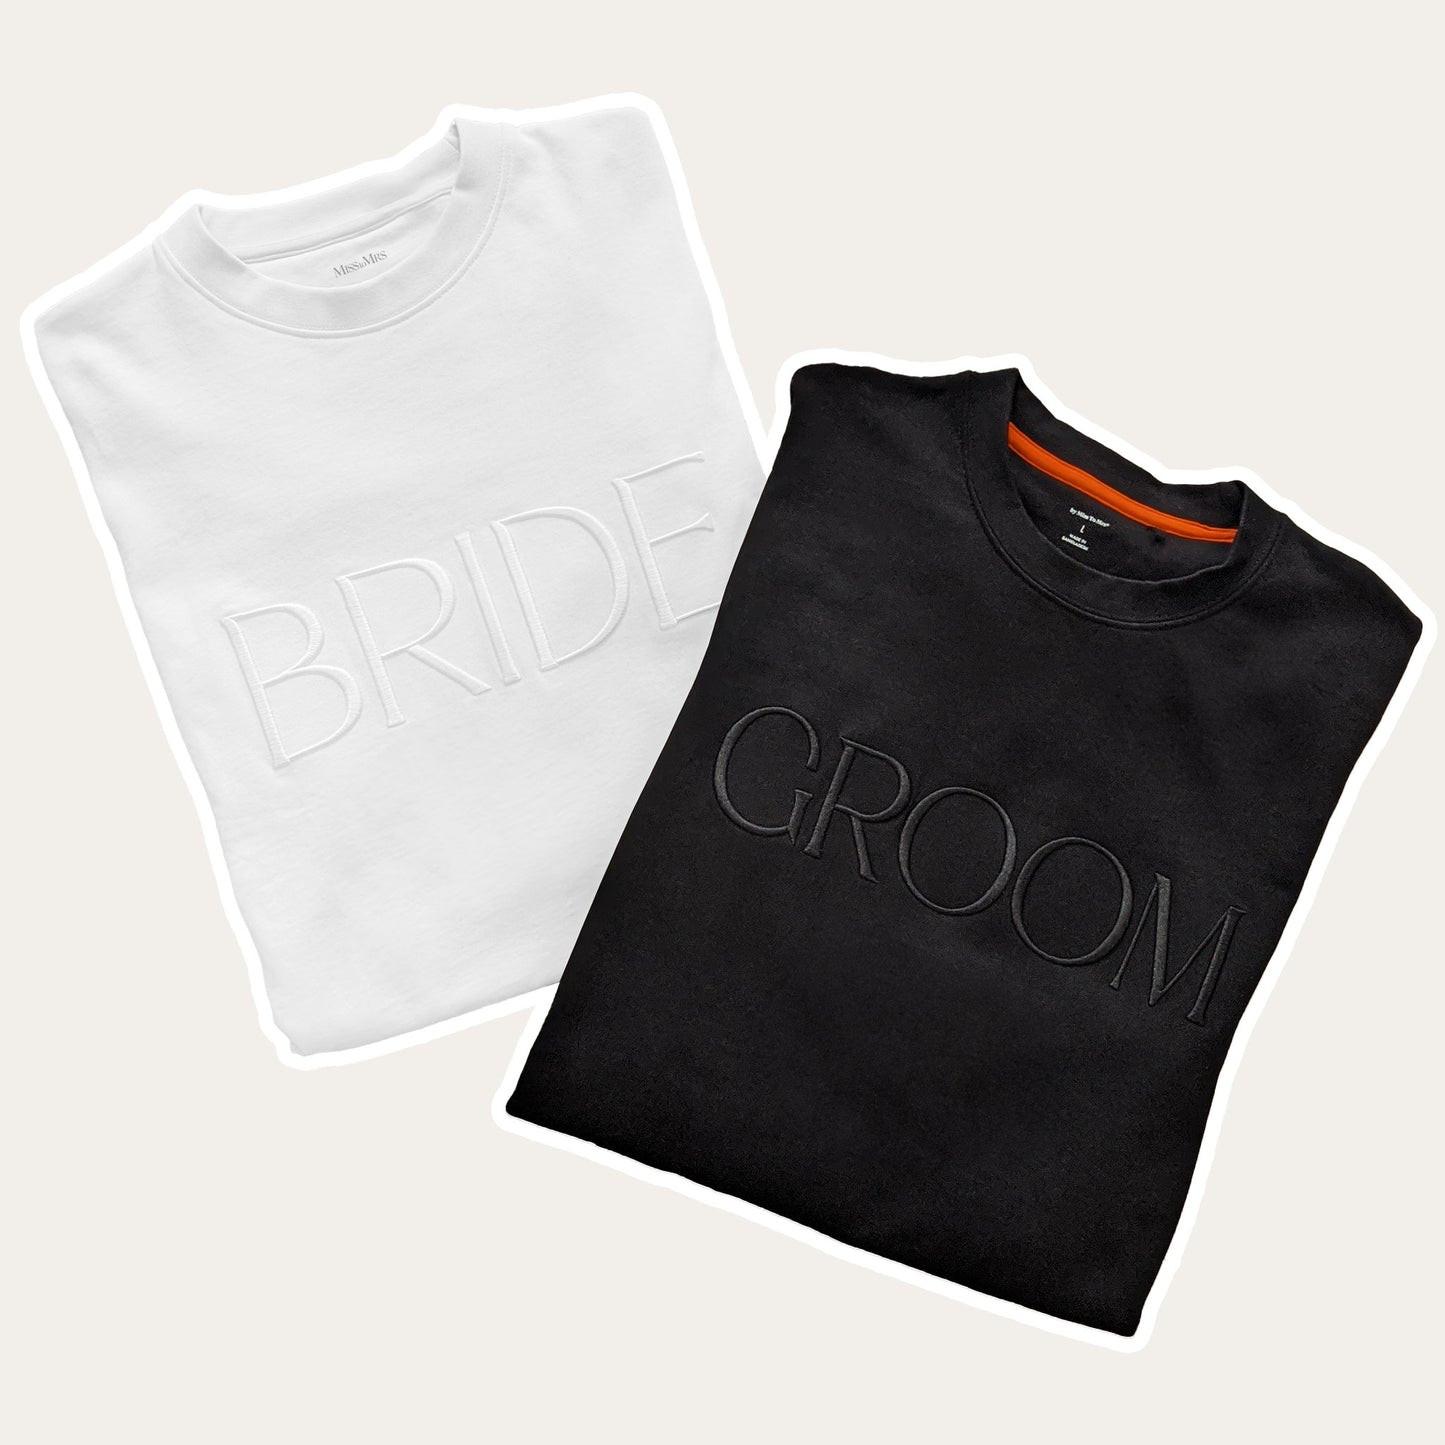 The set of two matching crewneck embroidered sweatshirts, white Bride sweatshirt and black Groom sweatshirt. Unisex fit, made of cotton.